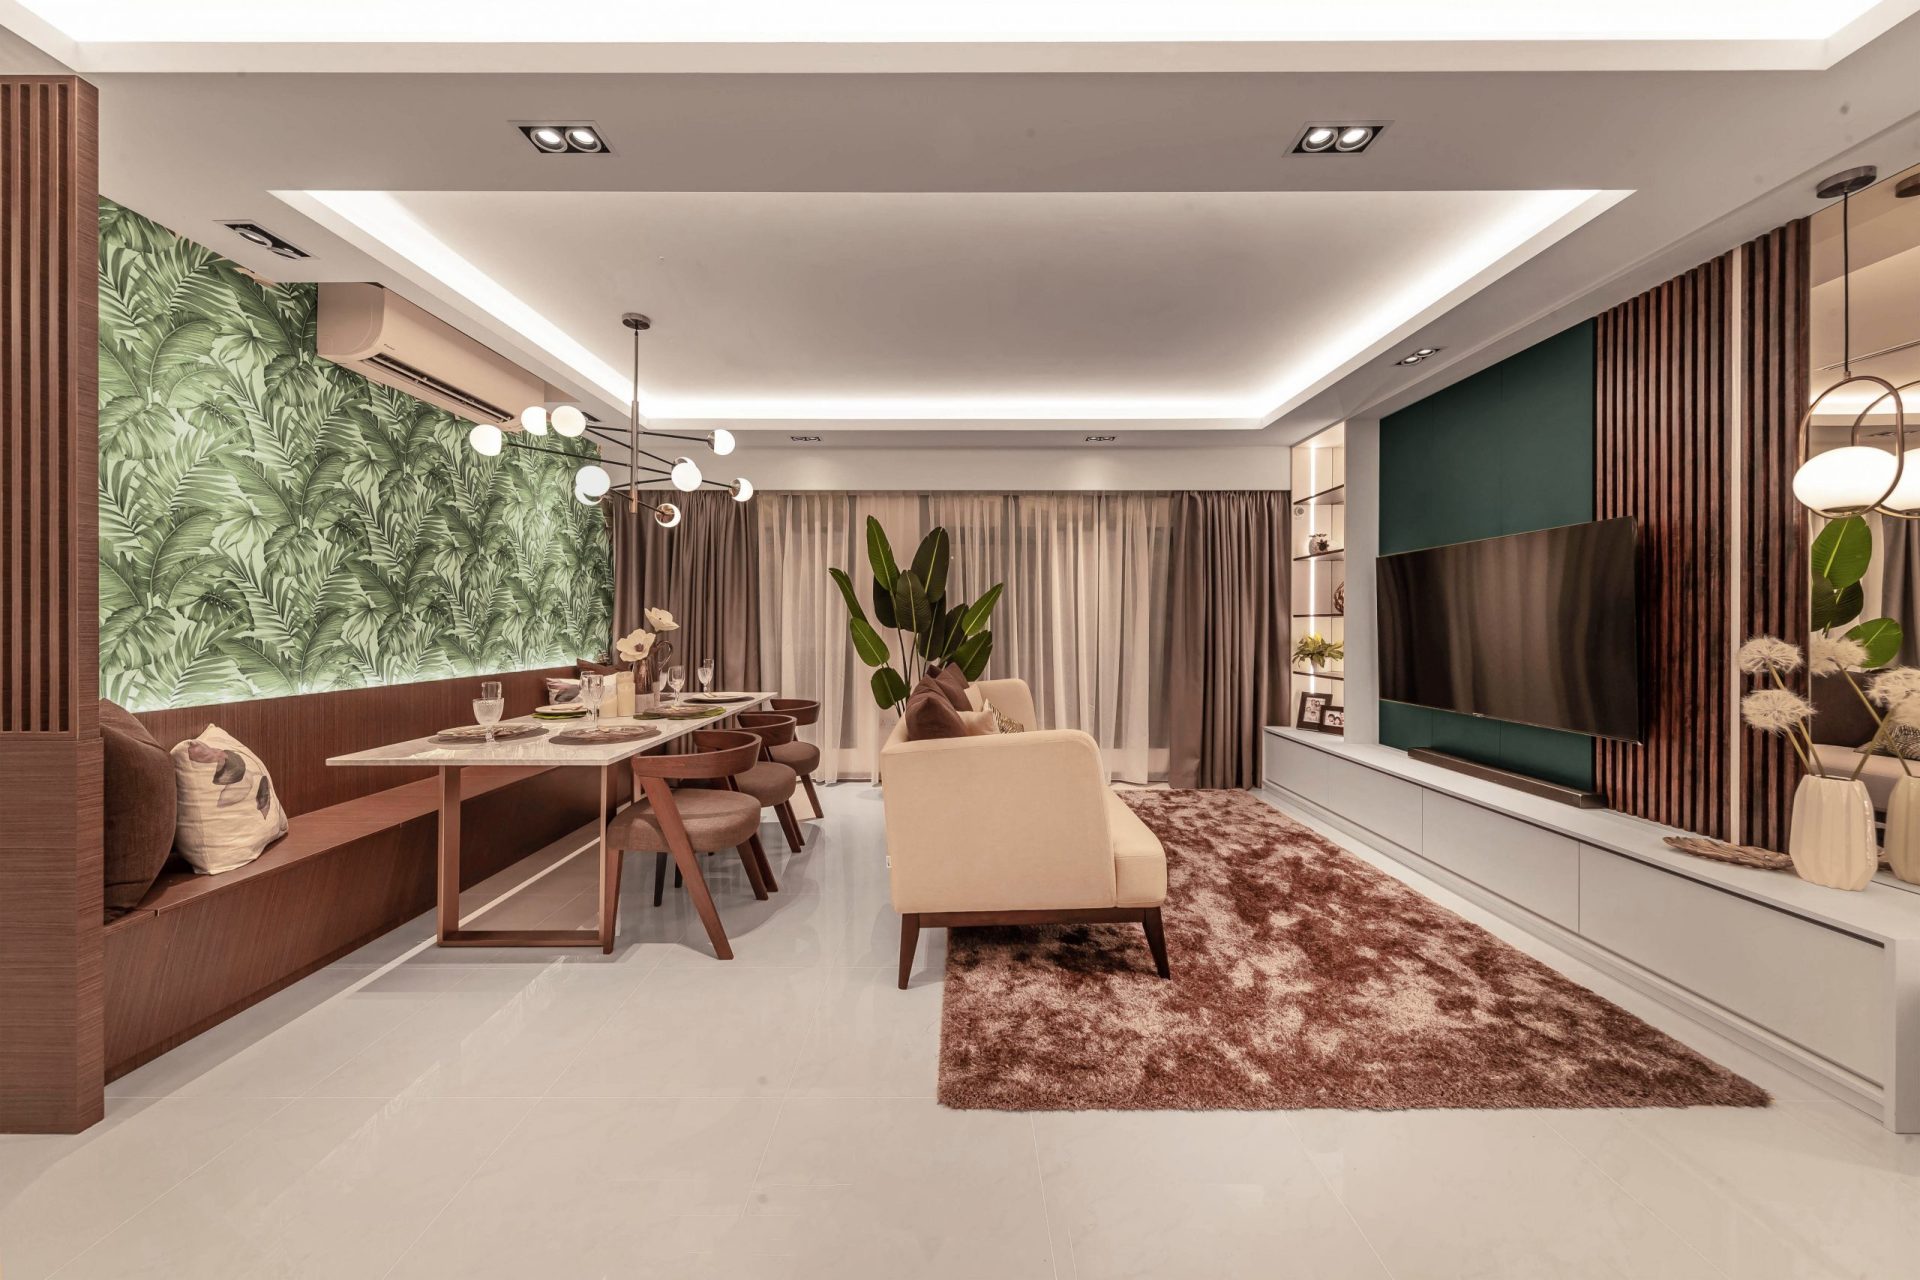 HDB’s My Nice Home Gallery Showcases Smart Home Features in Its Newly Refreshed Interior Design in 5-Room Showflat